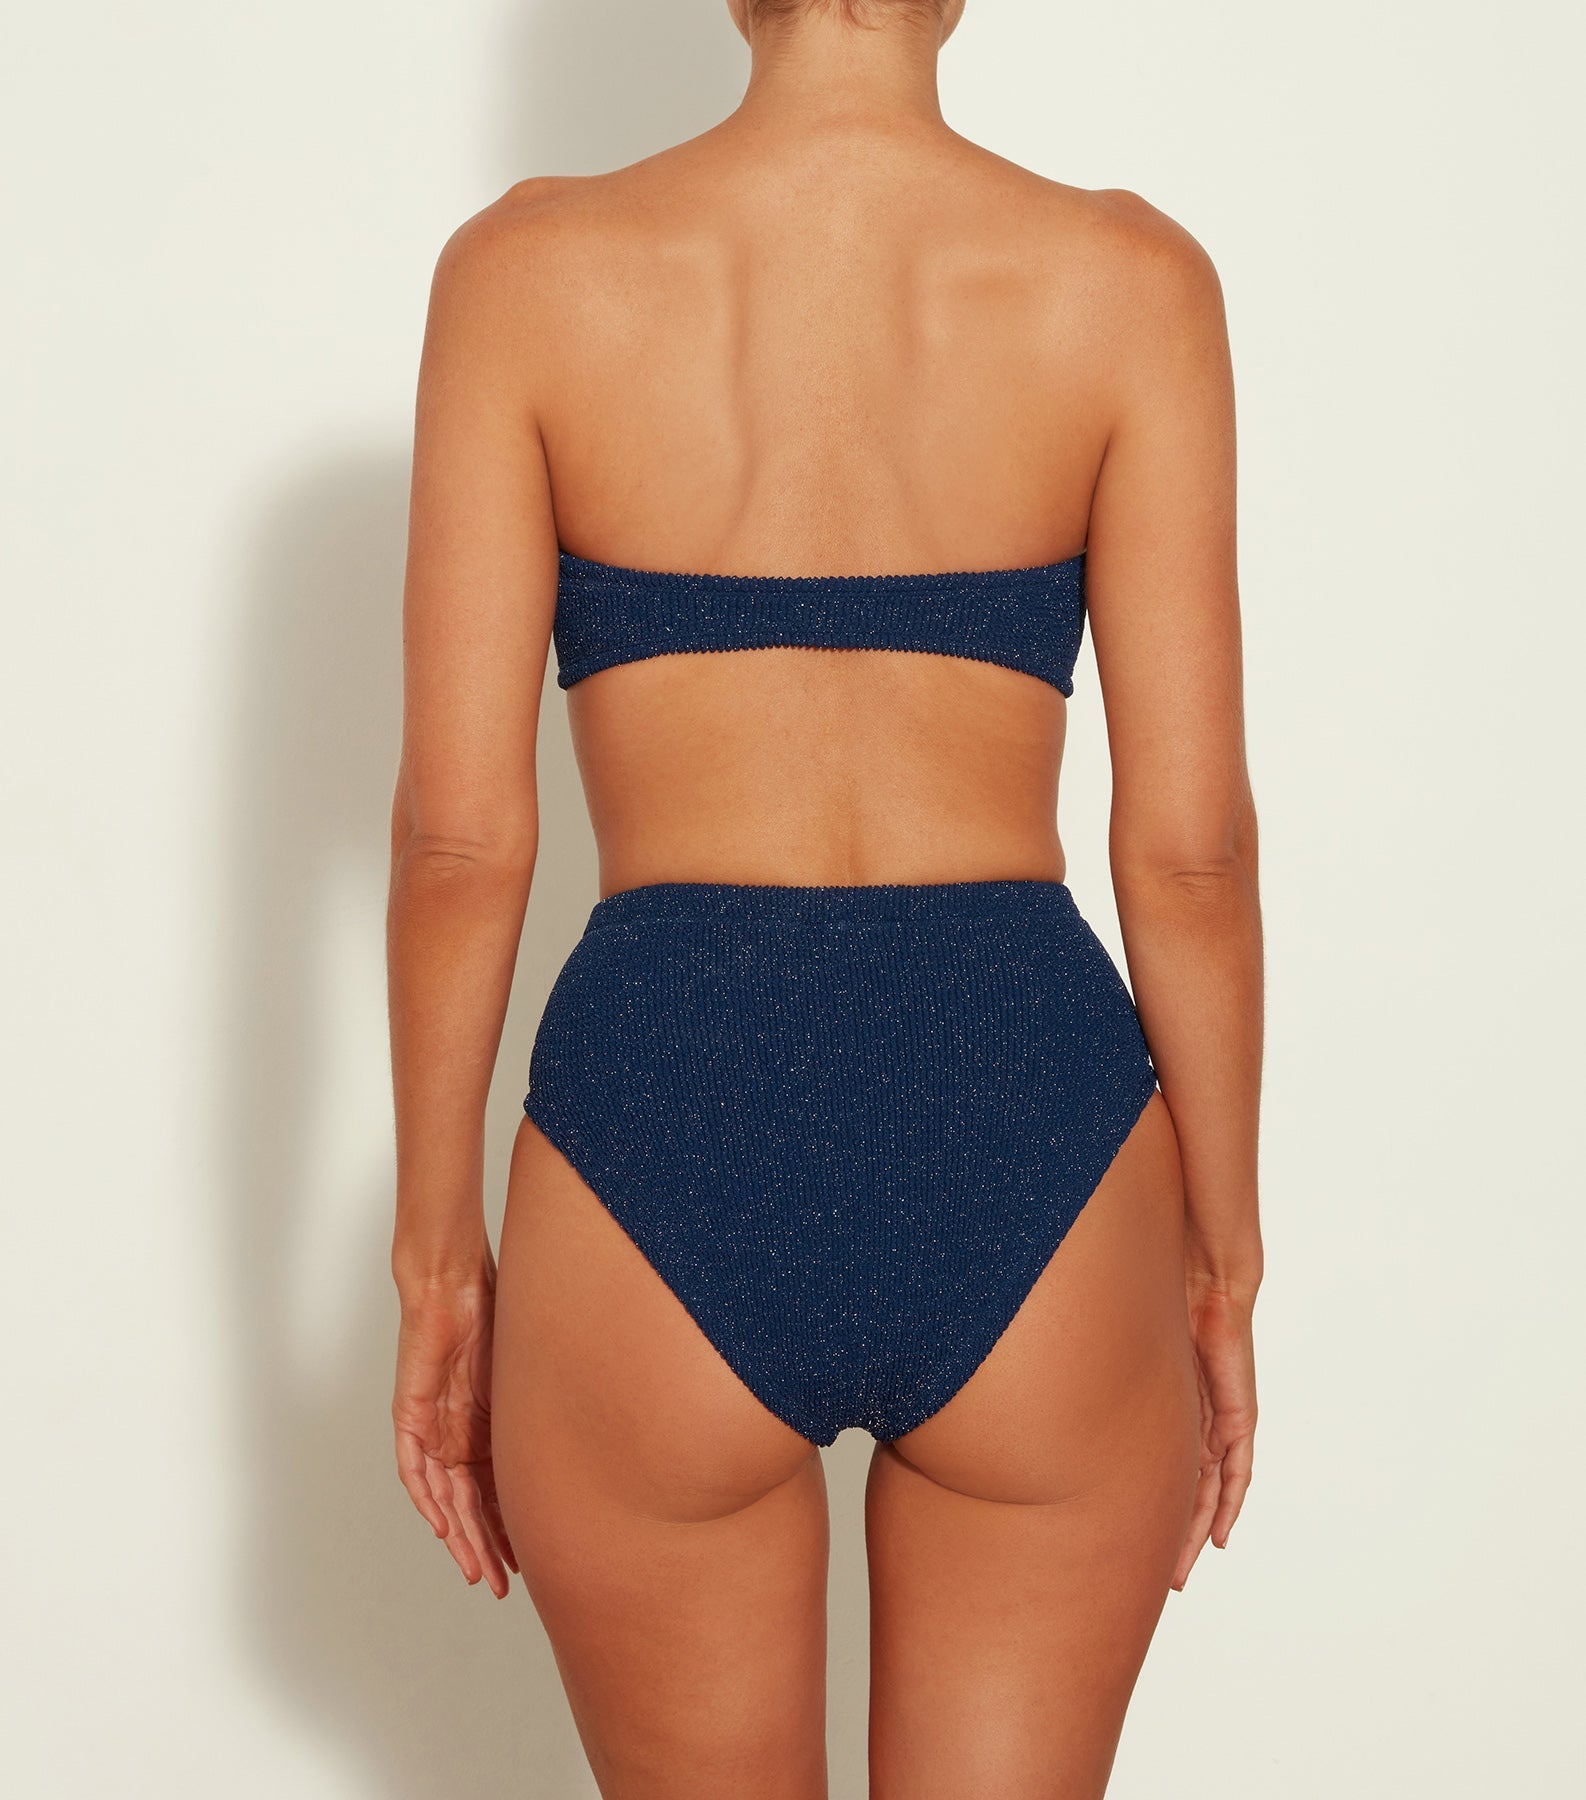 The Hunza G Ruby Bikini in Navy Silver available at The New Trend Australia